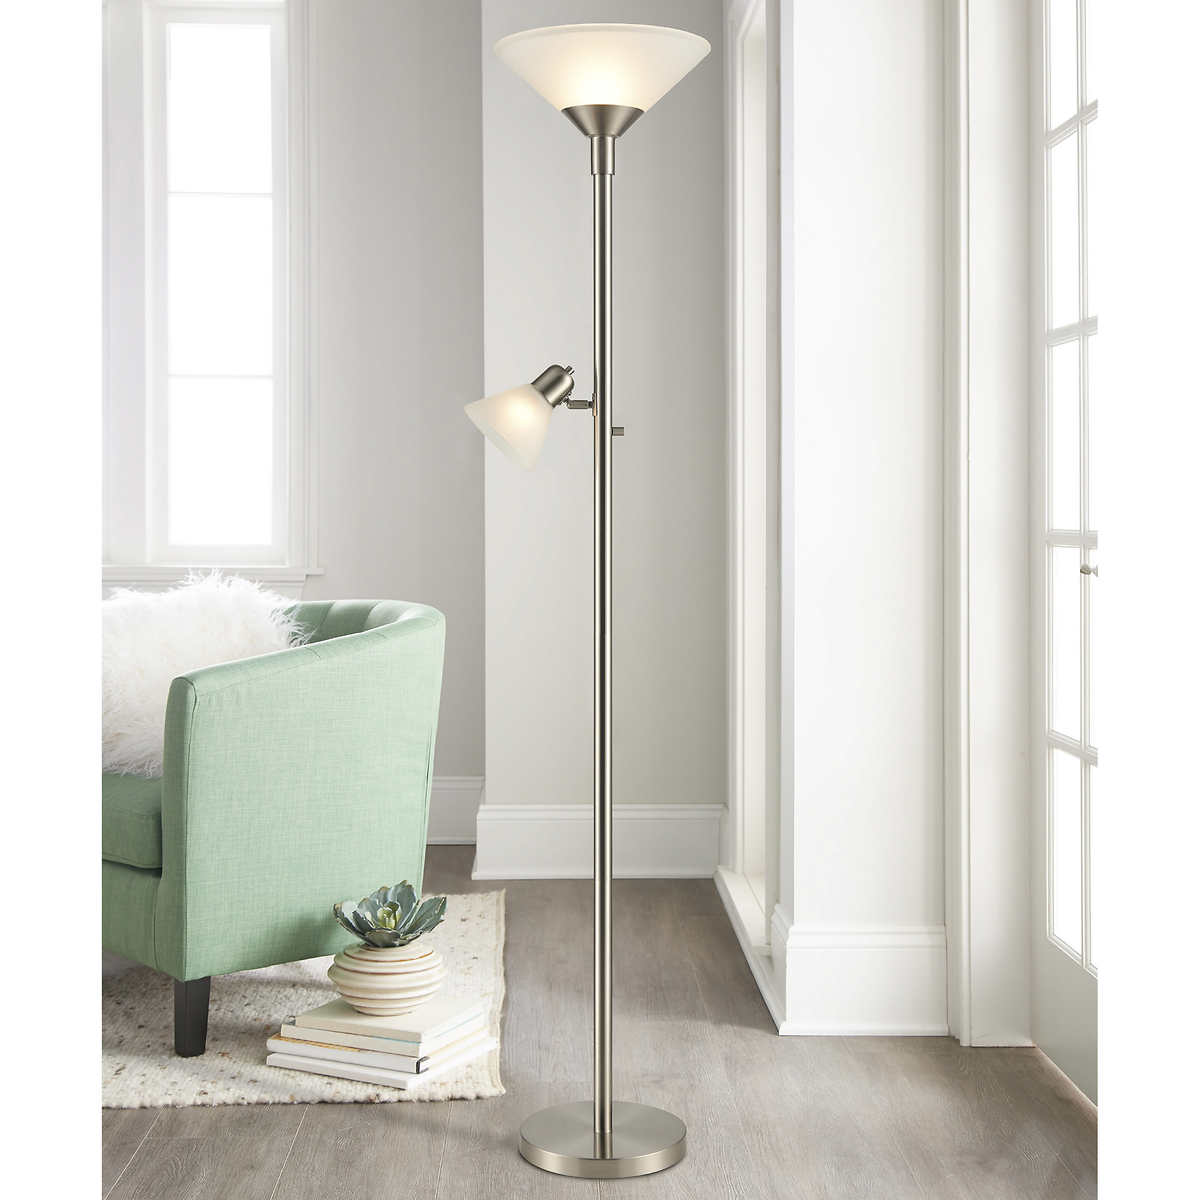 Torchiere Floor Lamp With Reading Light, Torchiere Floor Lamp With Reading Light Costco